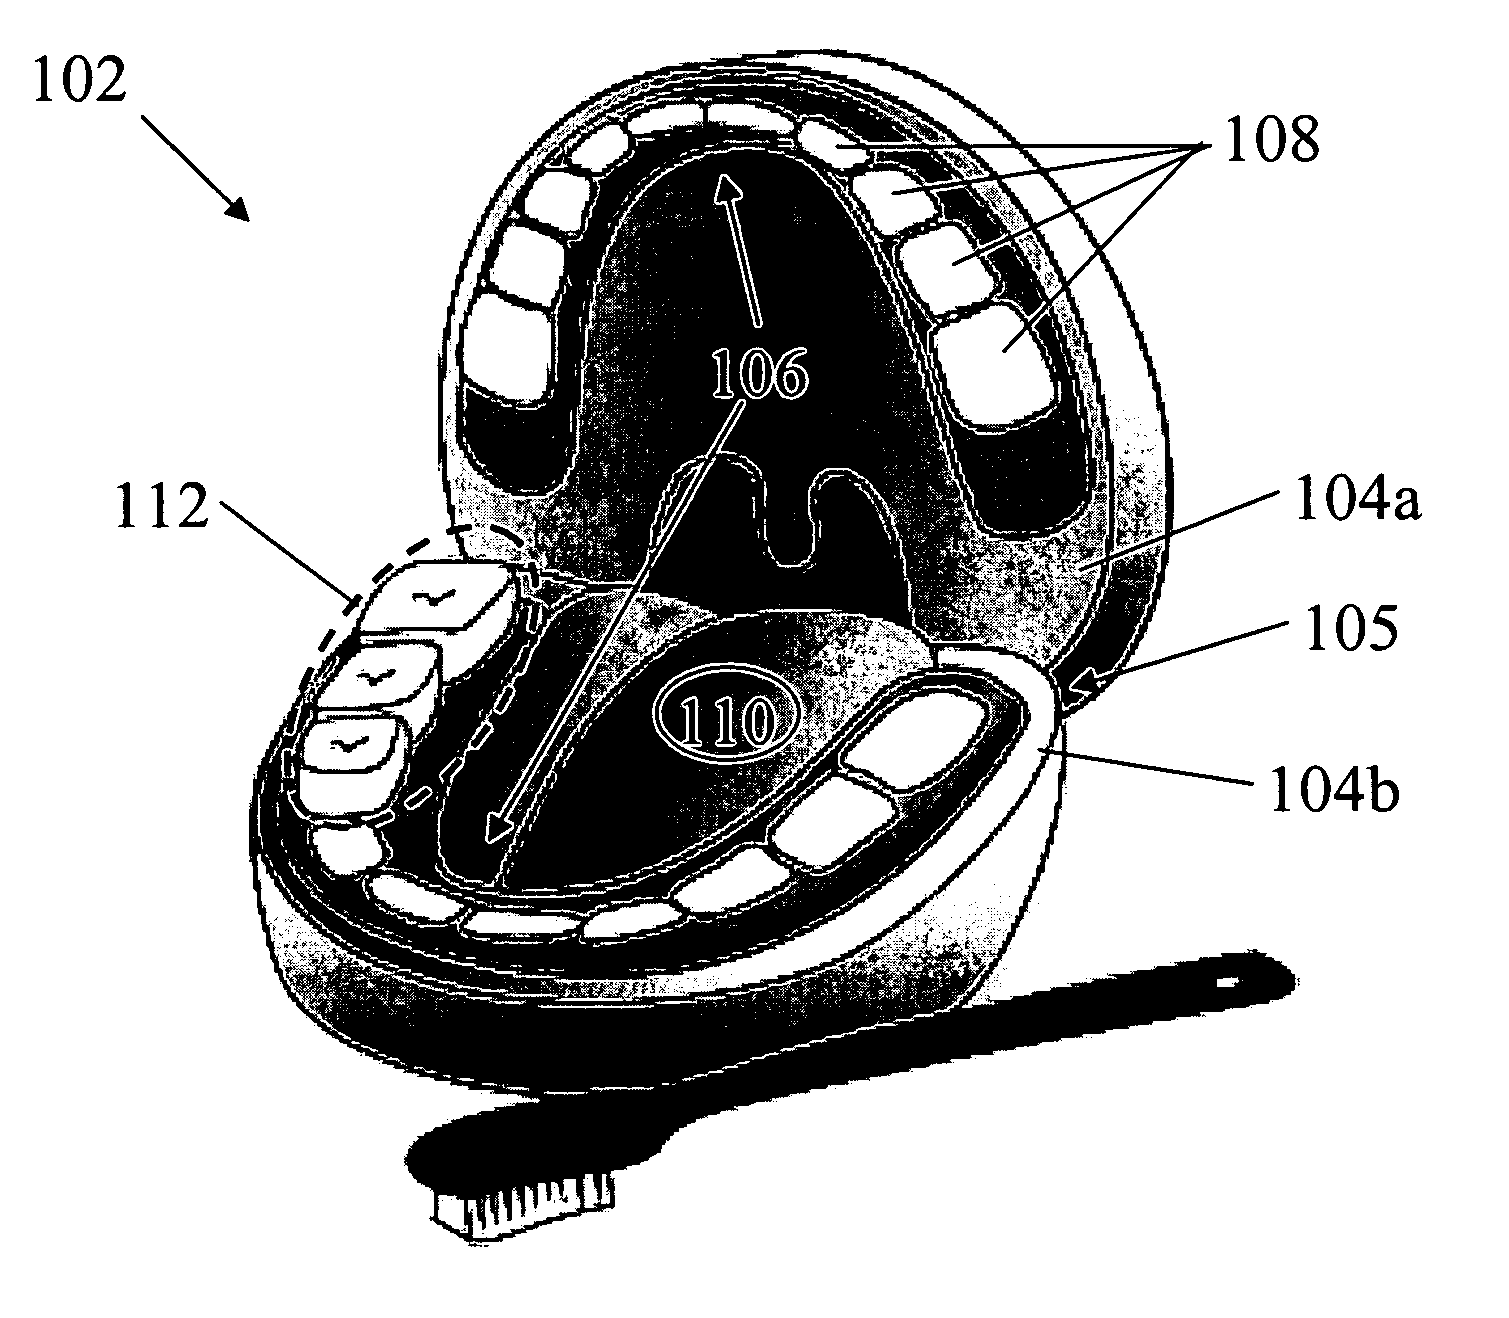 Device and method for promoting effective oral hygiene by a child